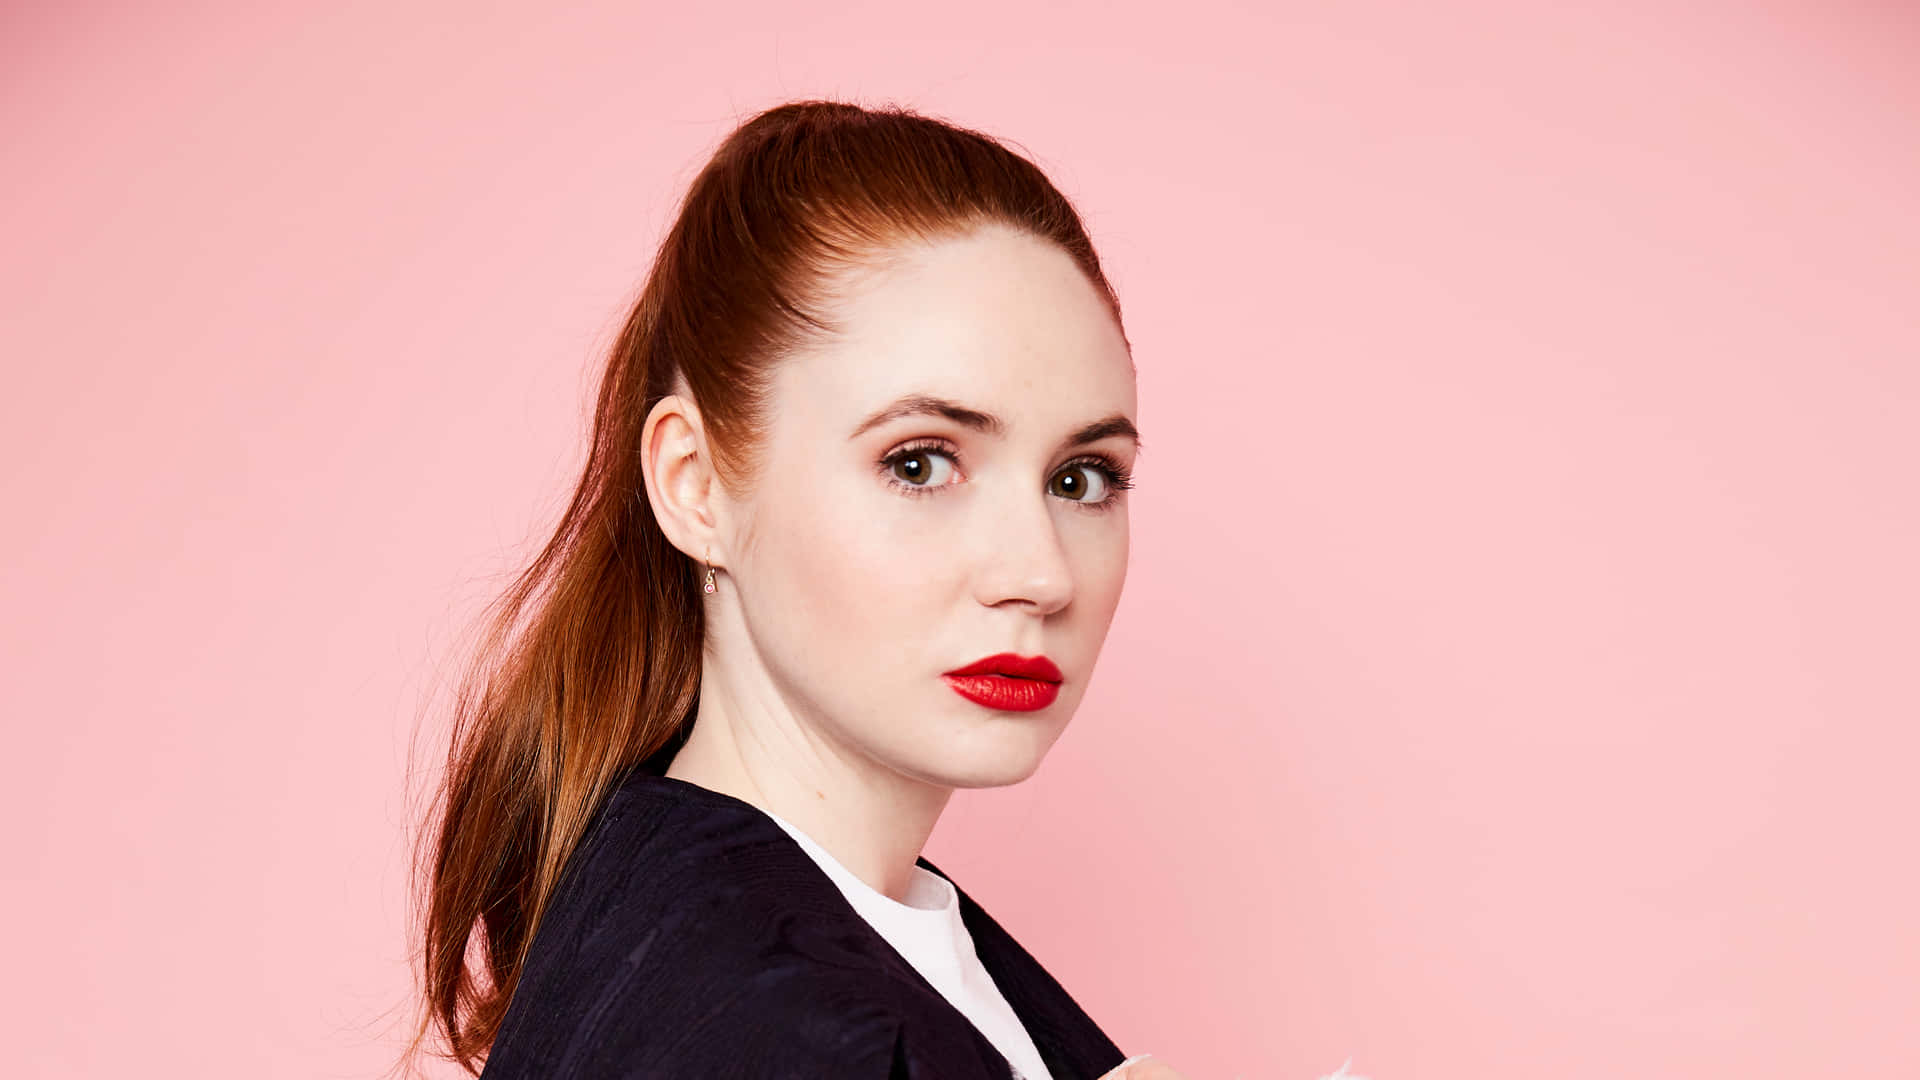 British Actress Karen Gillan Graces The Cover Of Marie Claire February 2021. Background